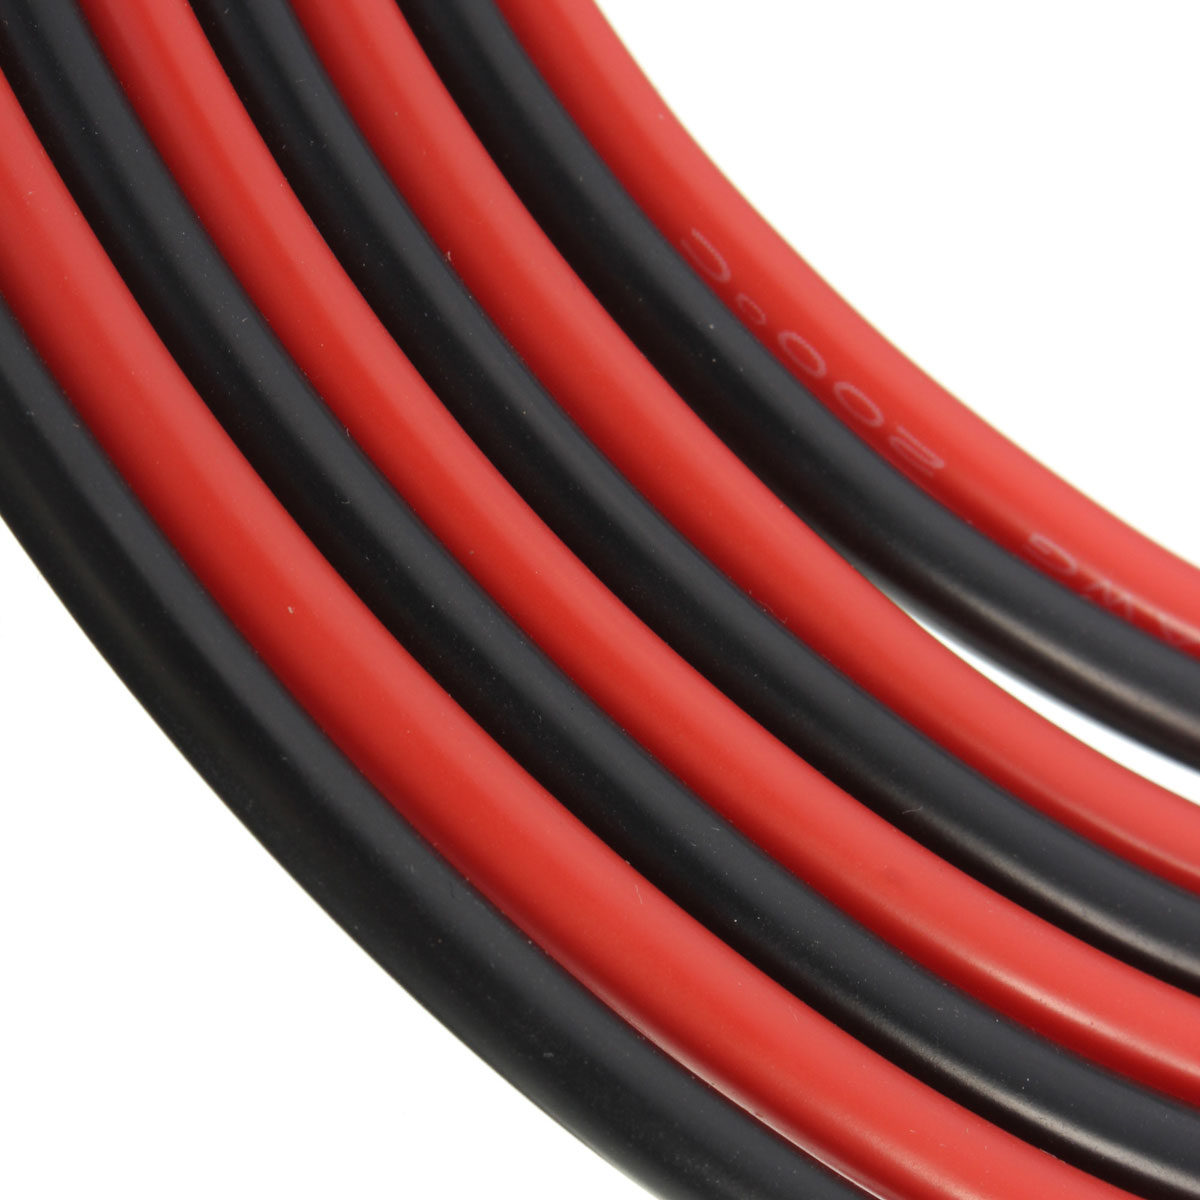 12AWG-3m-Gauge-Silicone-Wire-Flexible-Stranded-BlackRed-Copper-Cable-F-RC-983012-7